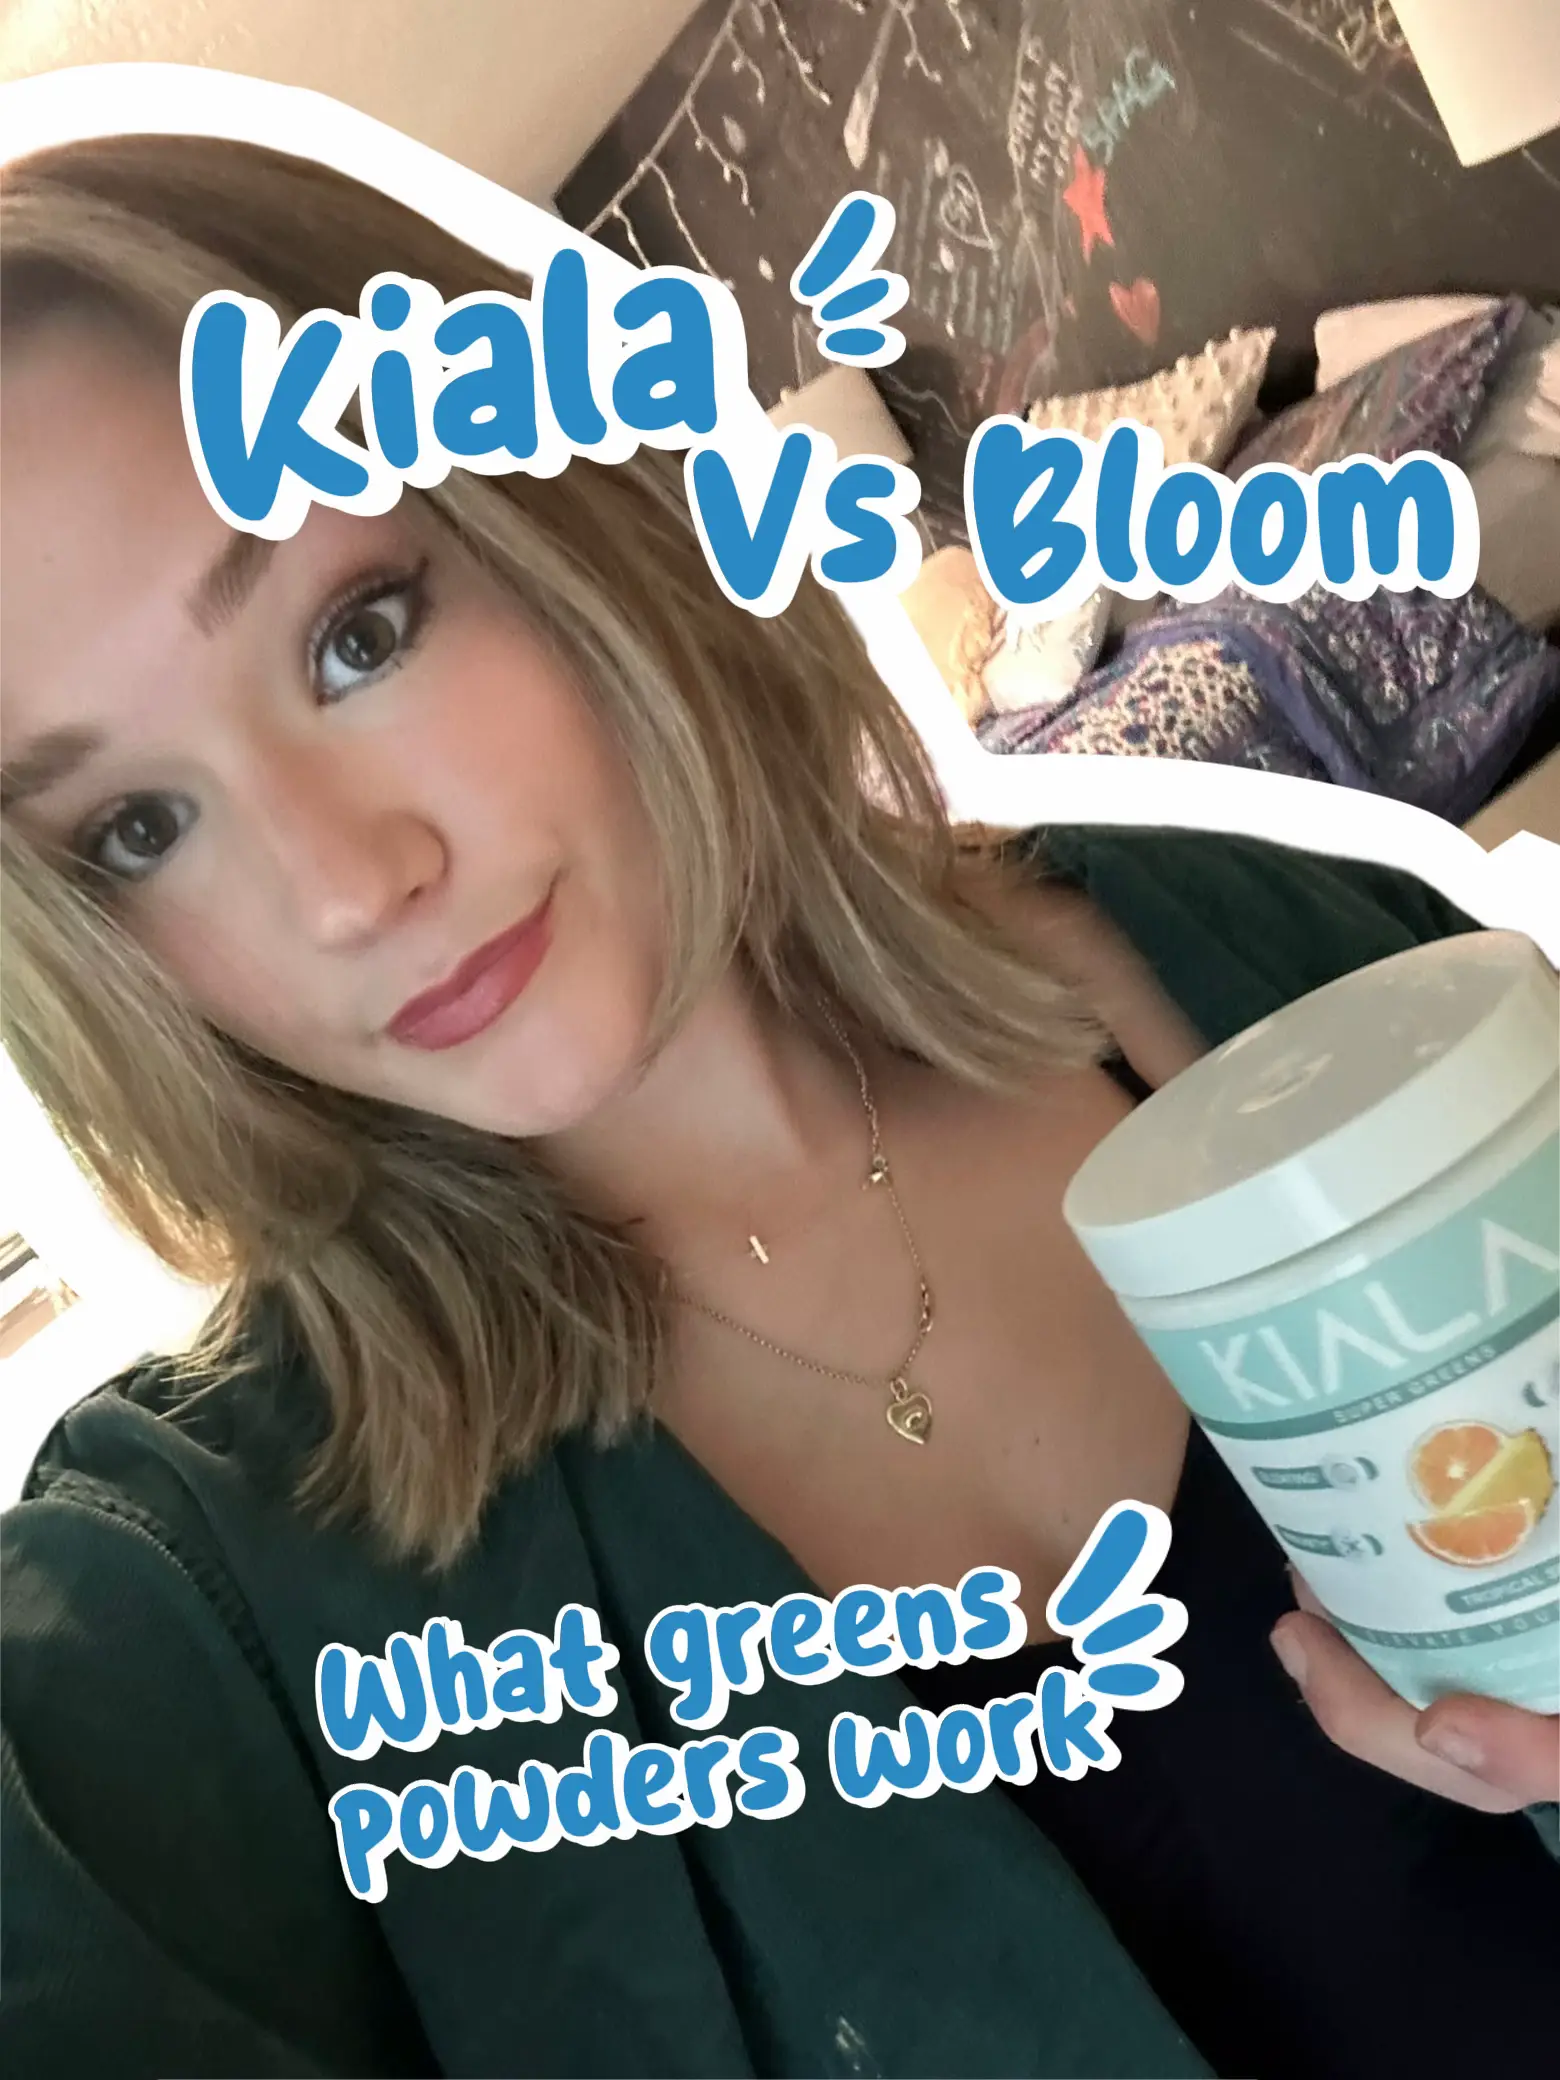 Kiala Super Greens Review - Is It Right For You?